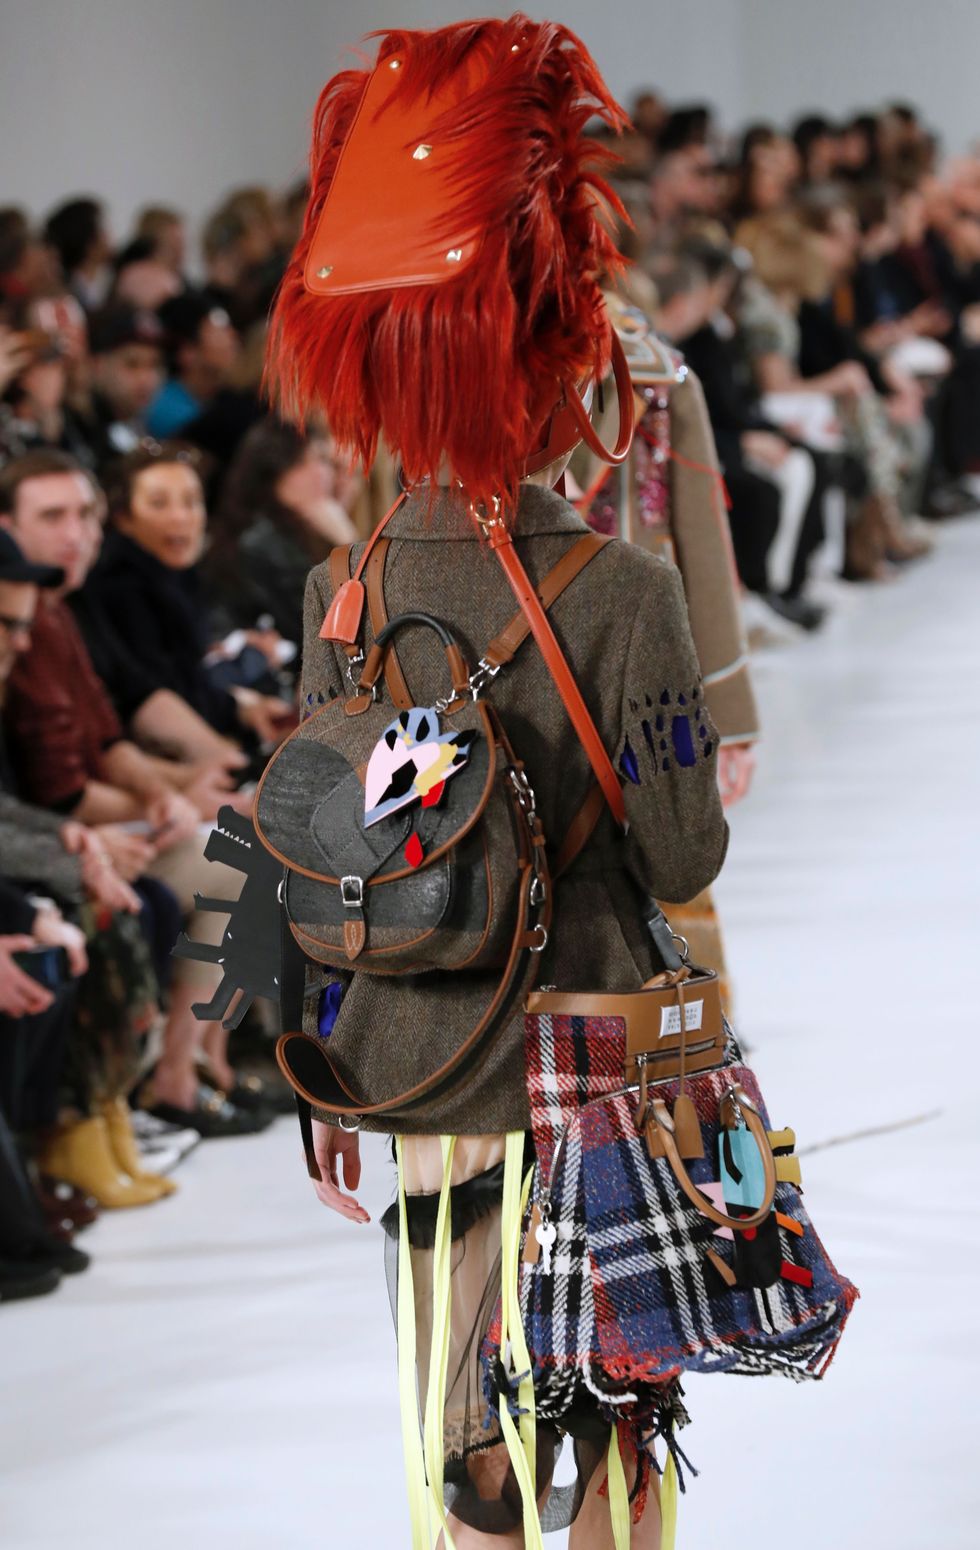 A model presents a creation by Maison Margiela during the women's Fall-Winter ready-to-wear collection fashion show in Paris on March 1, 2017. / AFP / FRANCOIS GUILLOT        (Photo credit should read FRANCOIS GUILLOT/AFP/Getty Images)